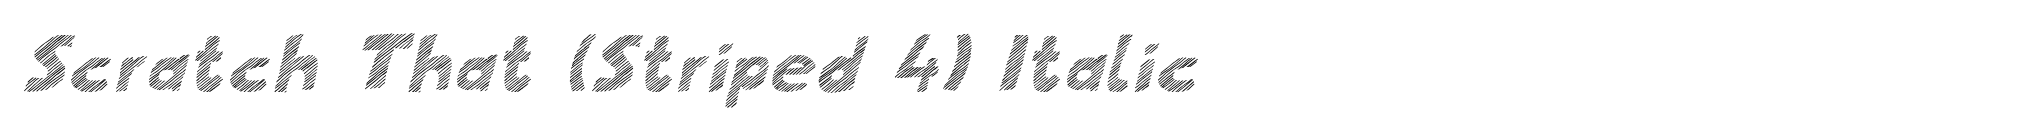 Scratch That (Striped 4) Italic image